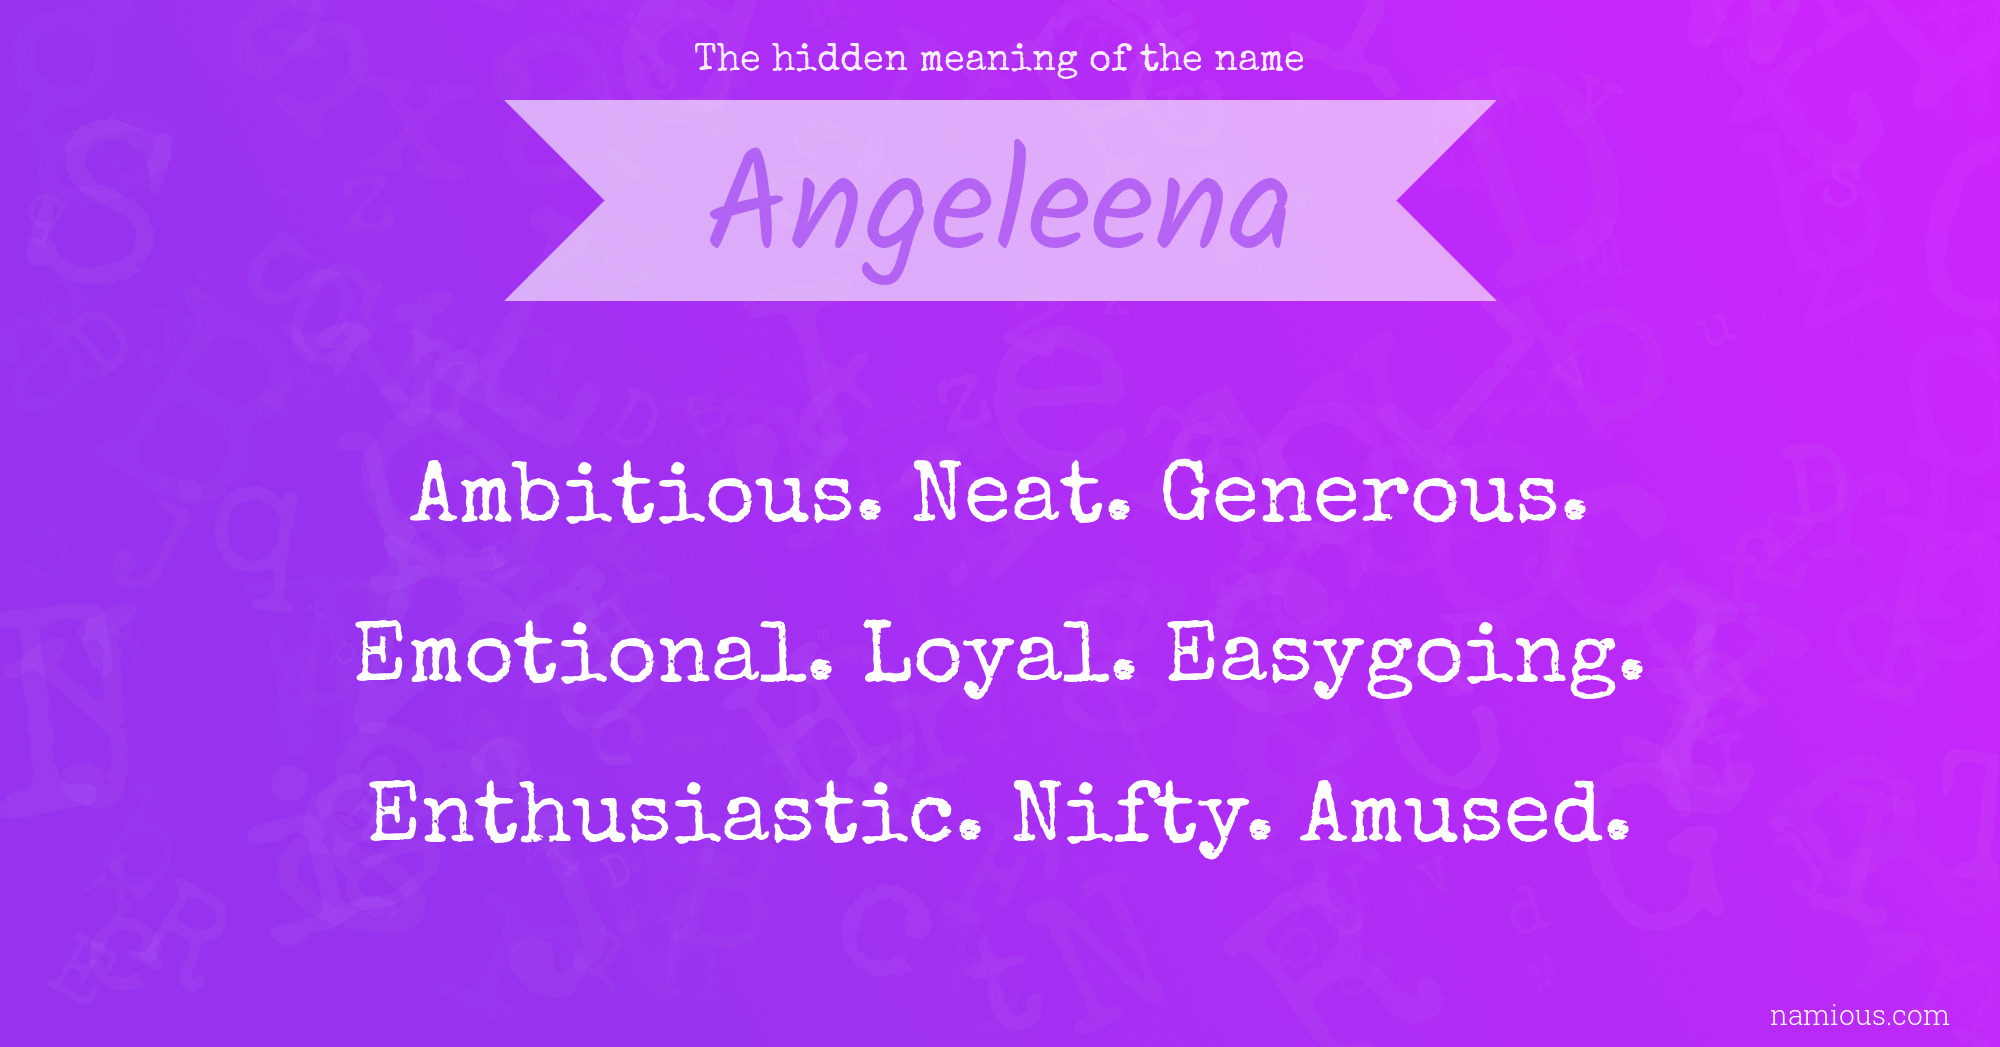 The hidden meaning of the name Angeleena